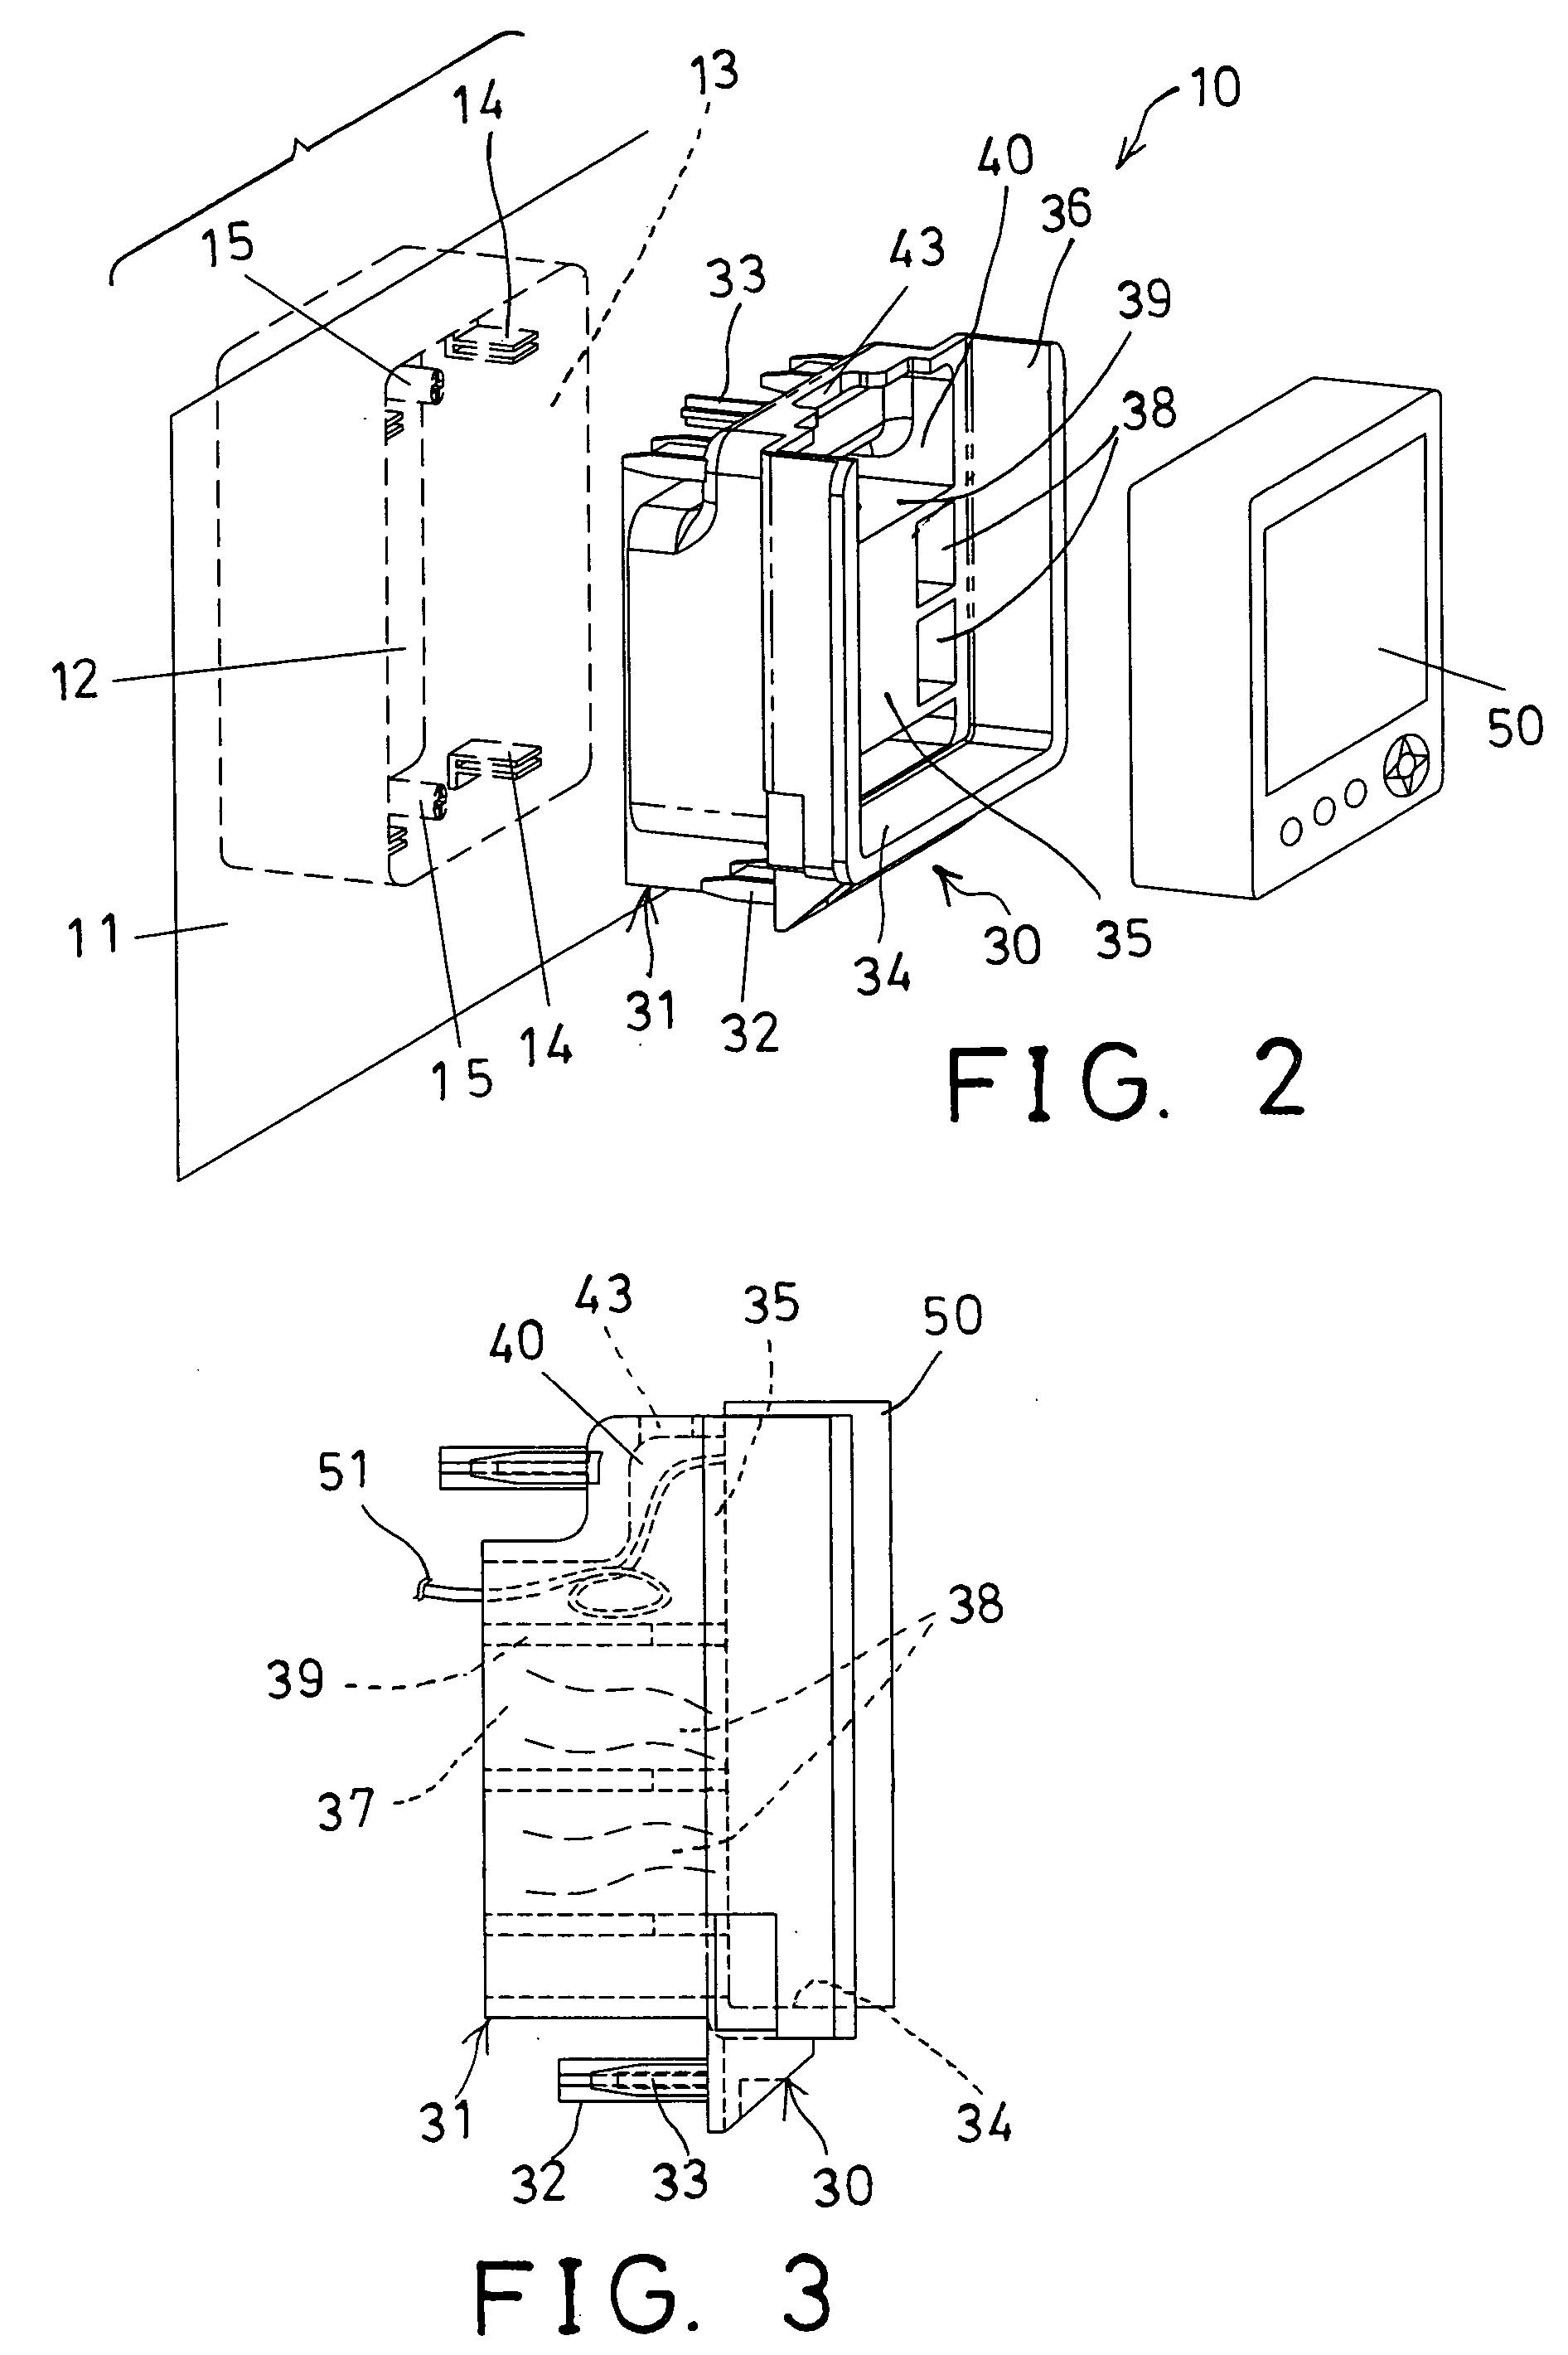 Monitor supporting combination for vehicle